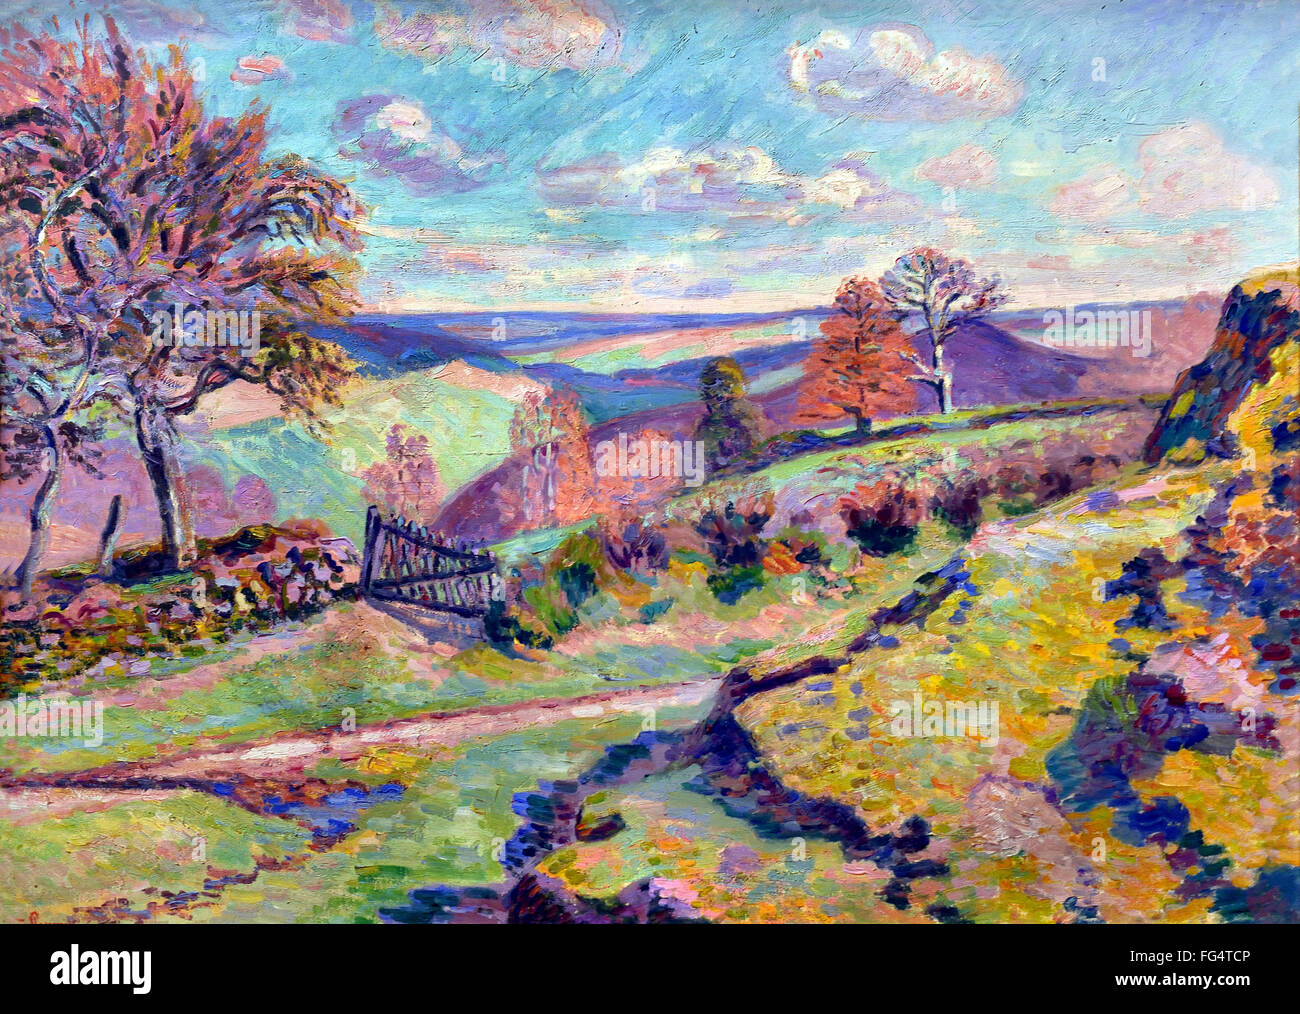 Armand Guillaumin 1841 - 1927 La pêche Crozant France French Banque D'Images